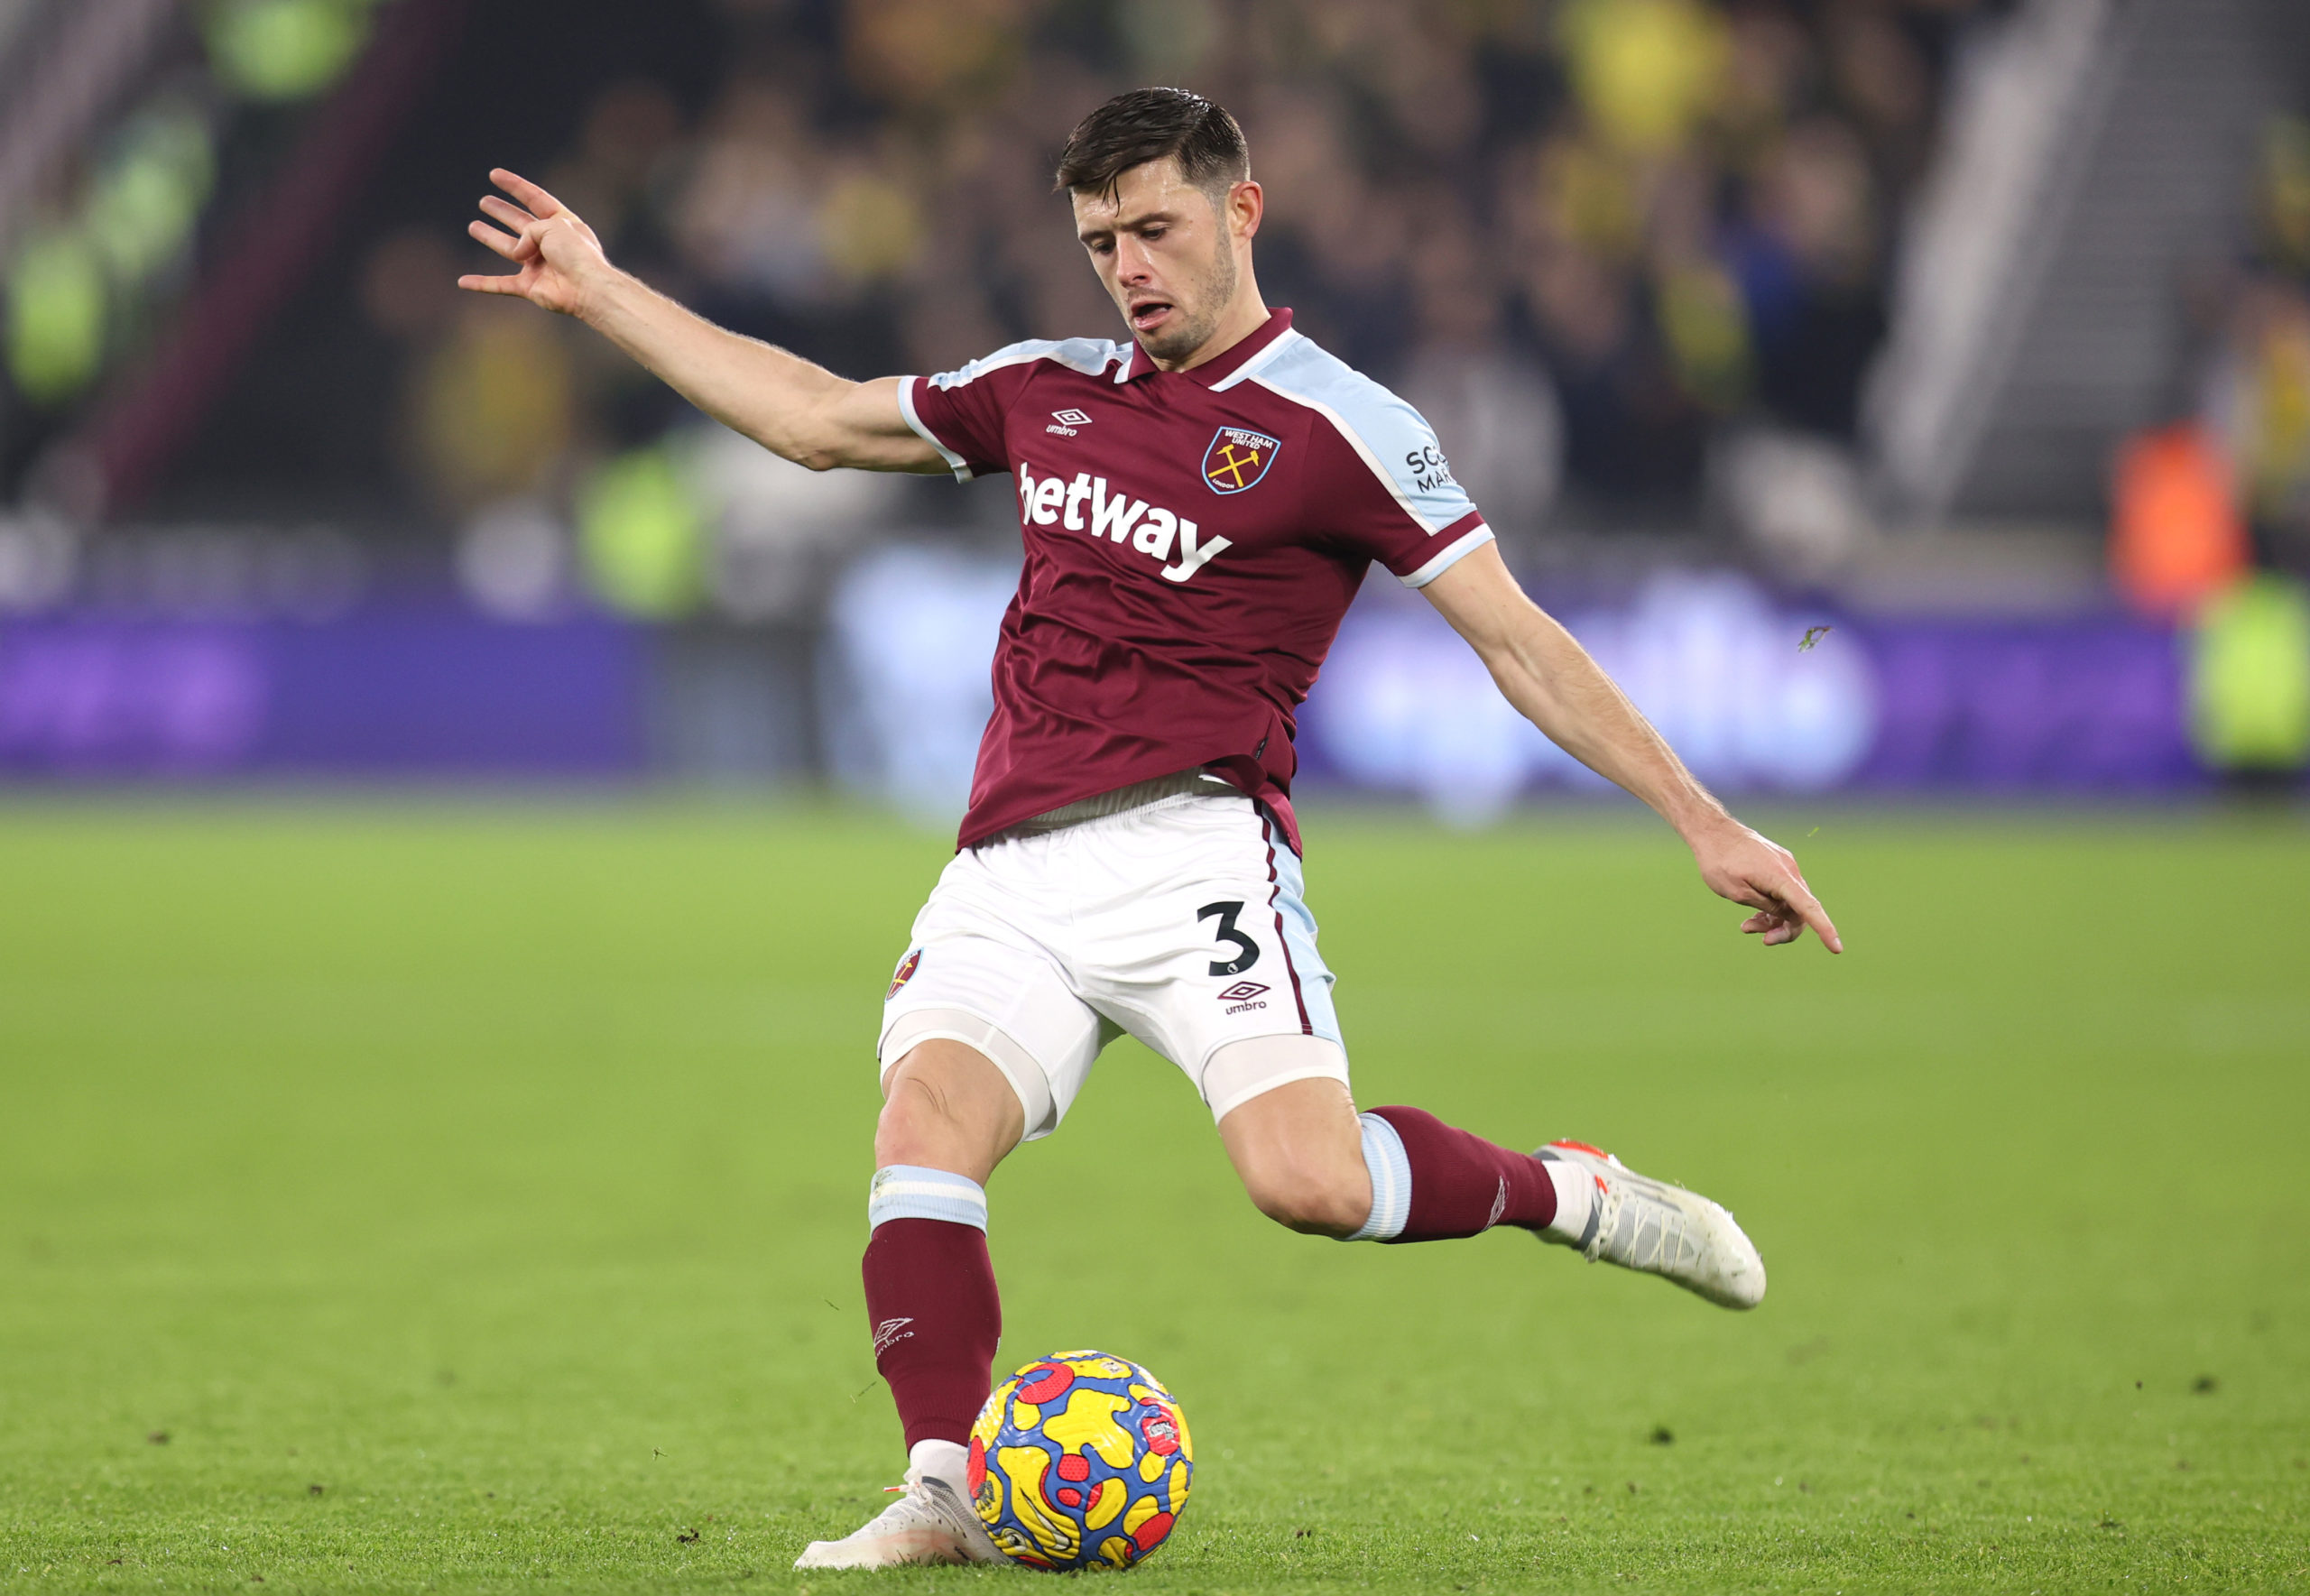 Aaron Cresswell raved about one West Ham player after his side's 2-0 win against Norwich